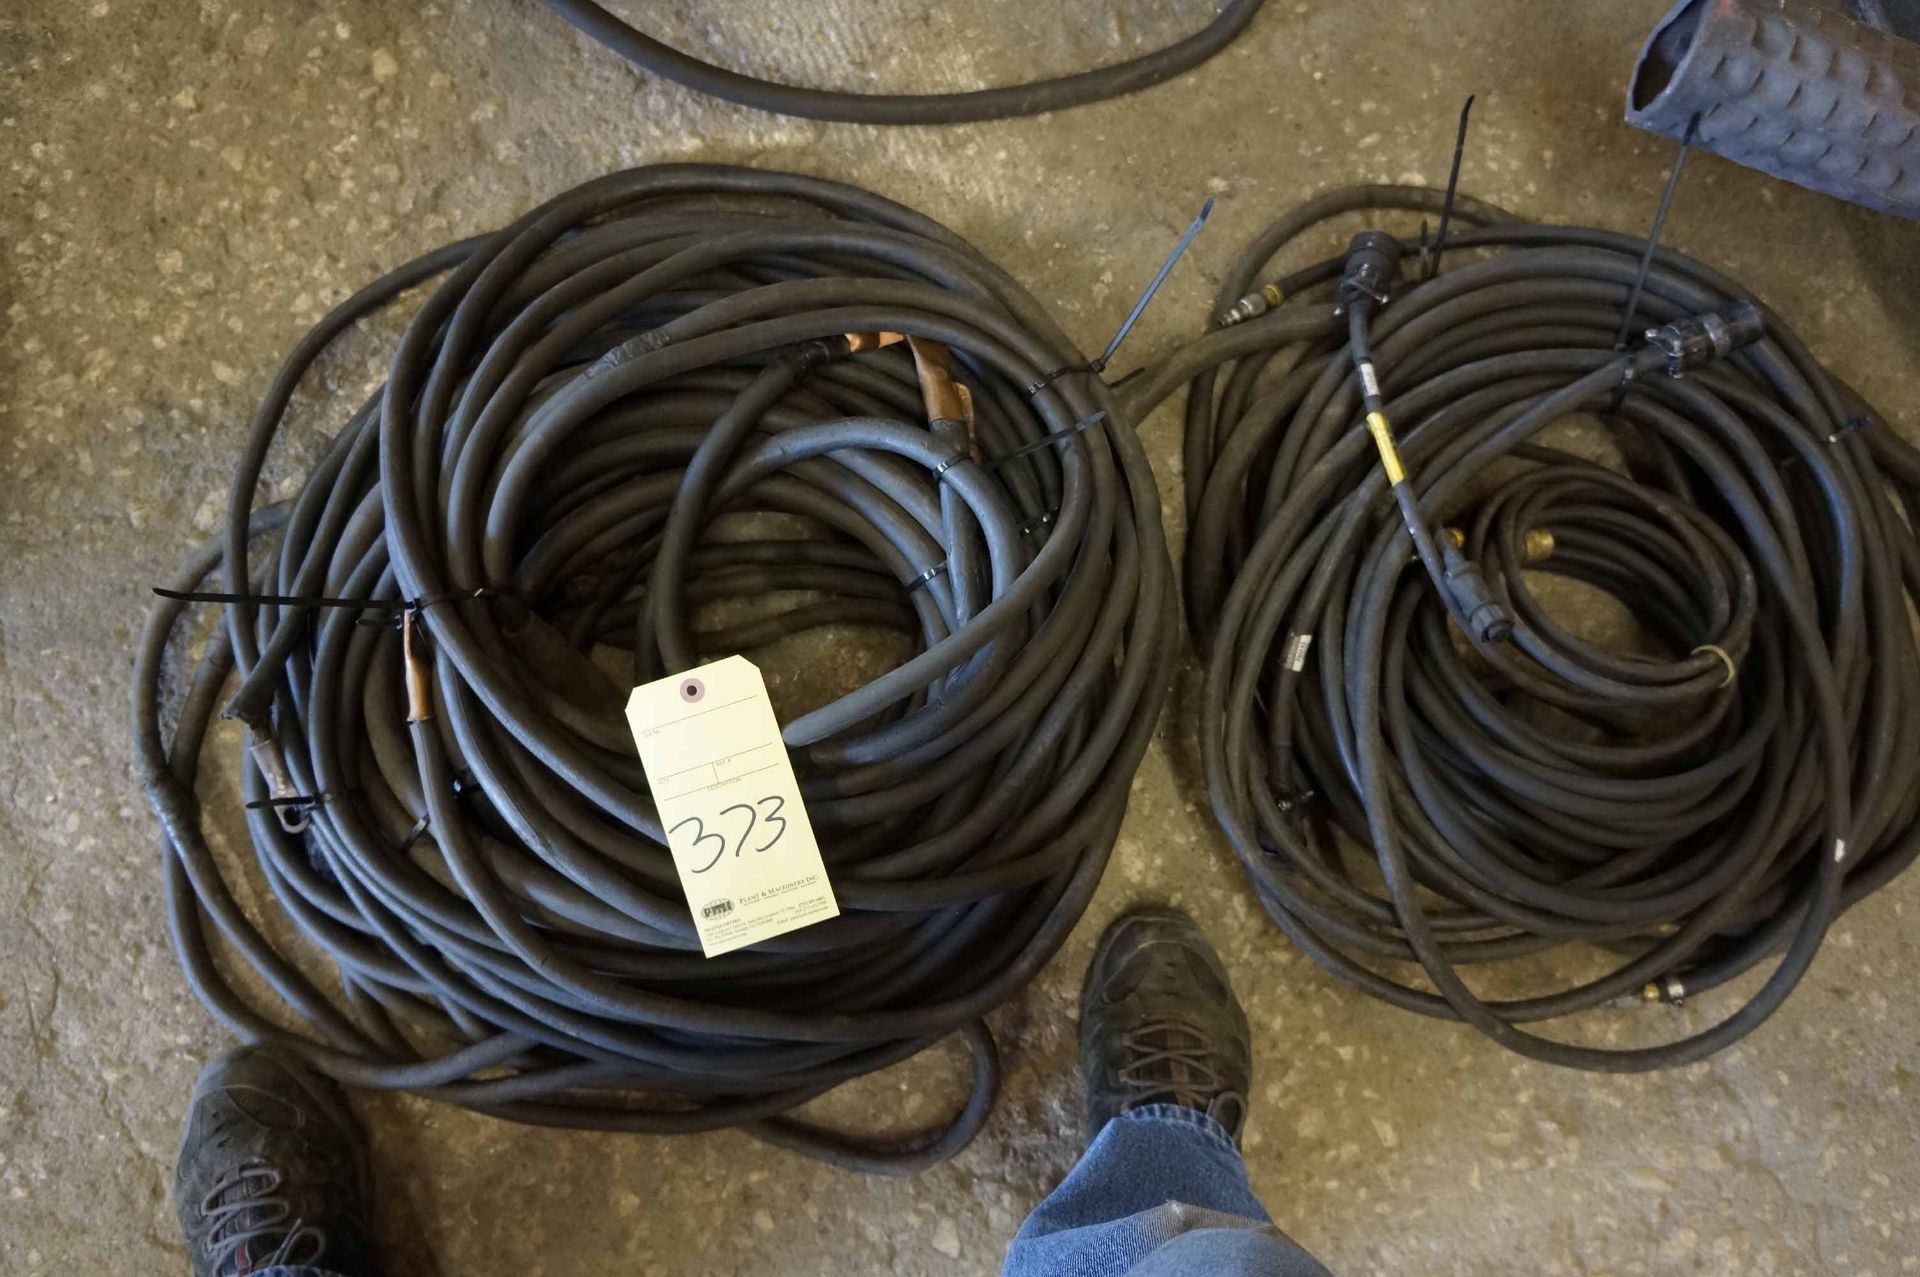 LOT CONSISTING OF: leads, torch handles & connecting cables